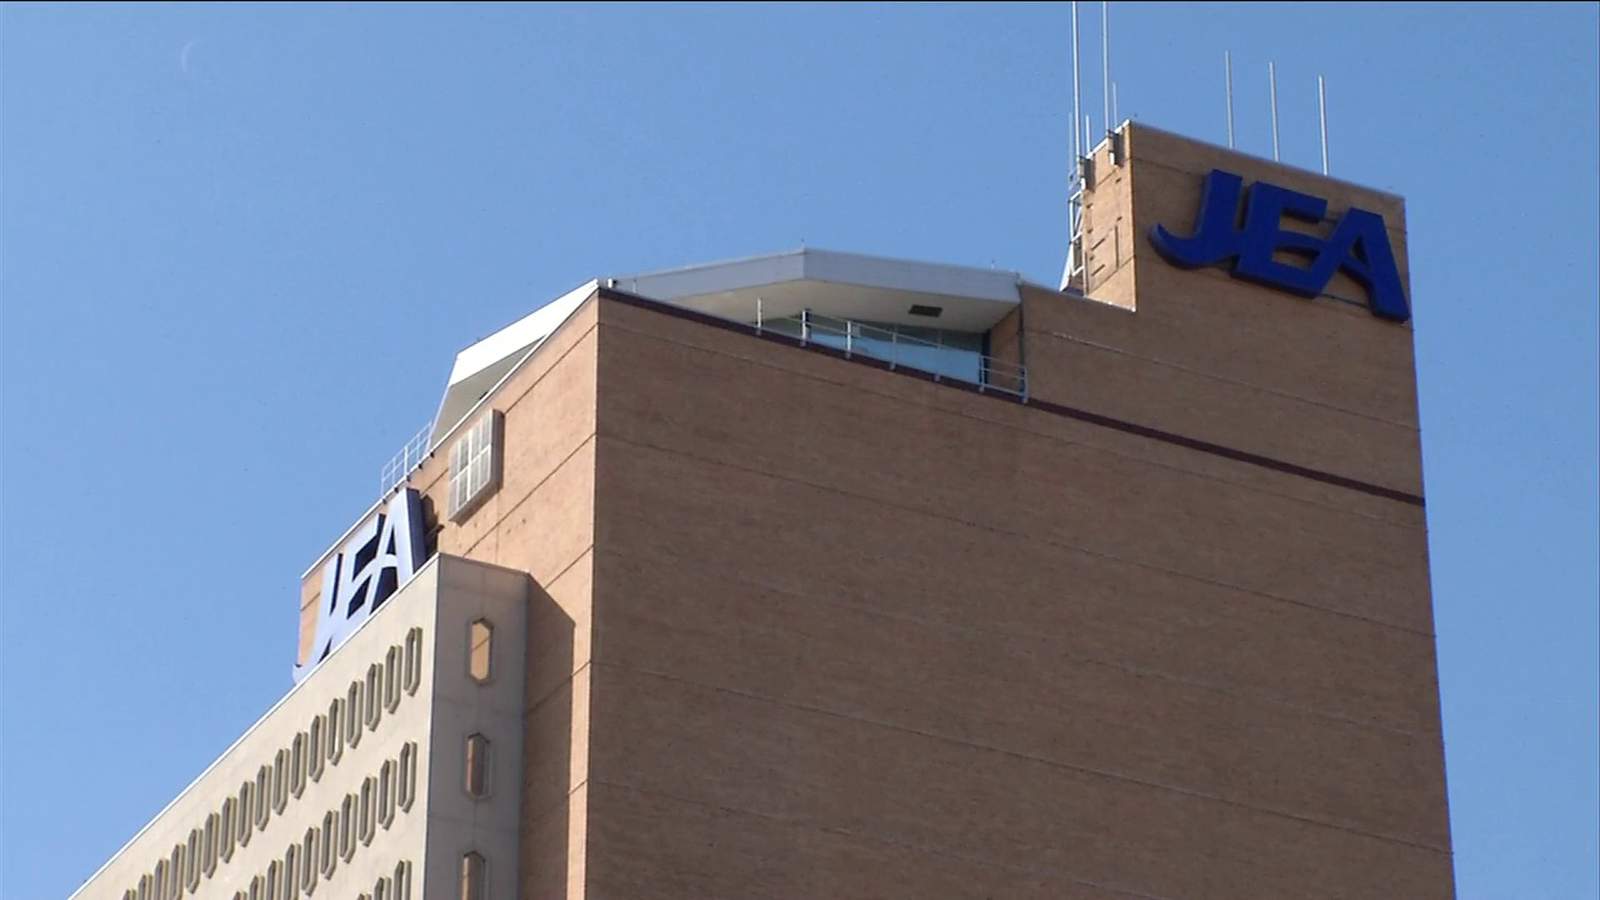 JEA fires 9 former executives. But they will still get paid for 20 weeks